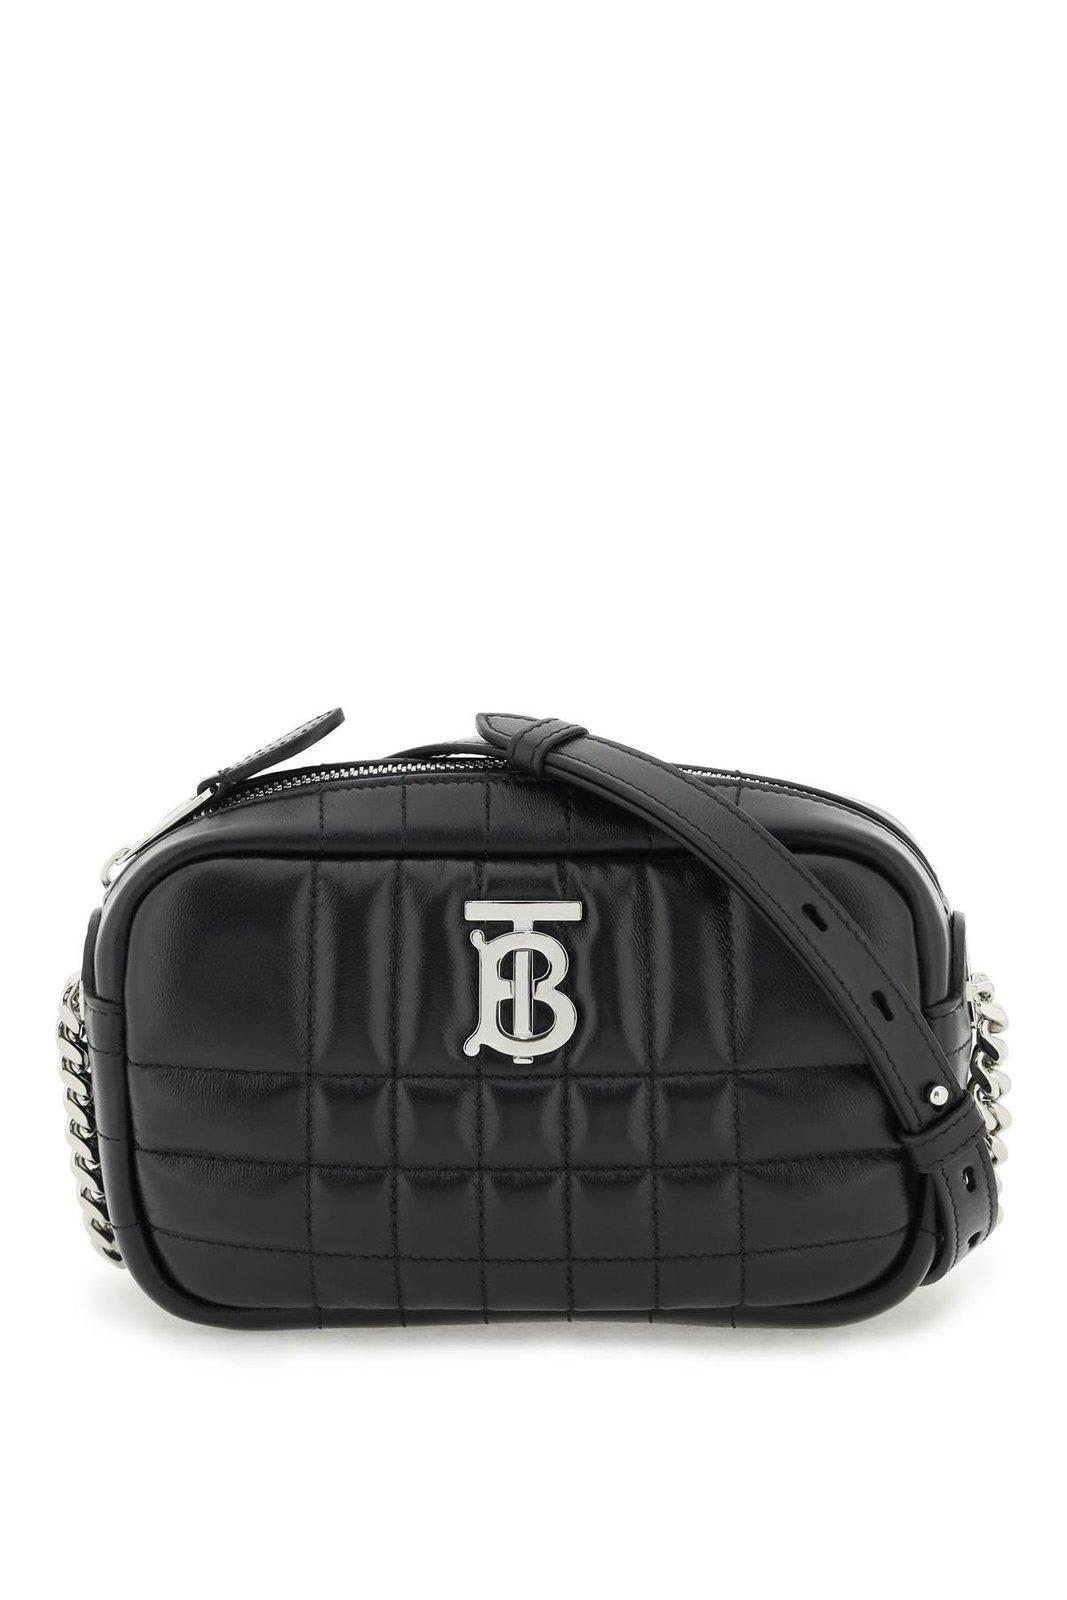 Burberry Quilted Small Lola Camera Bag